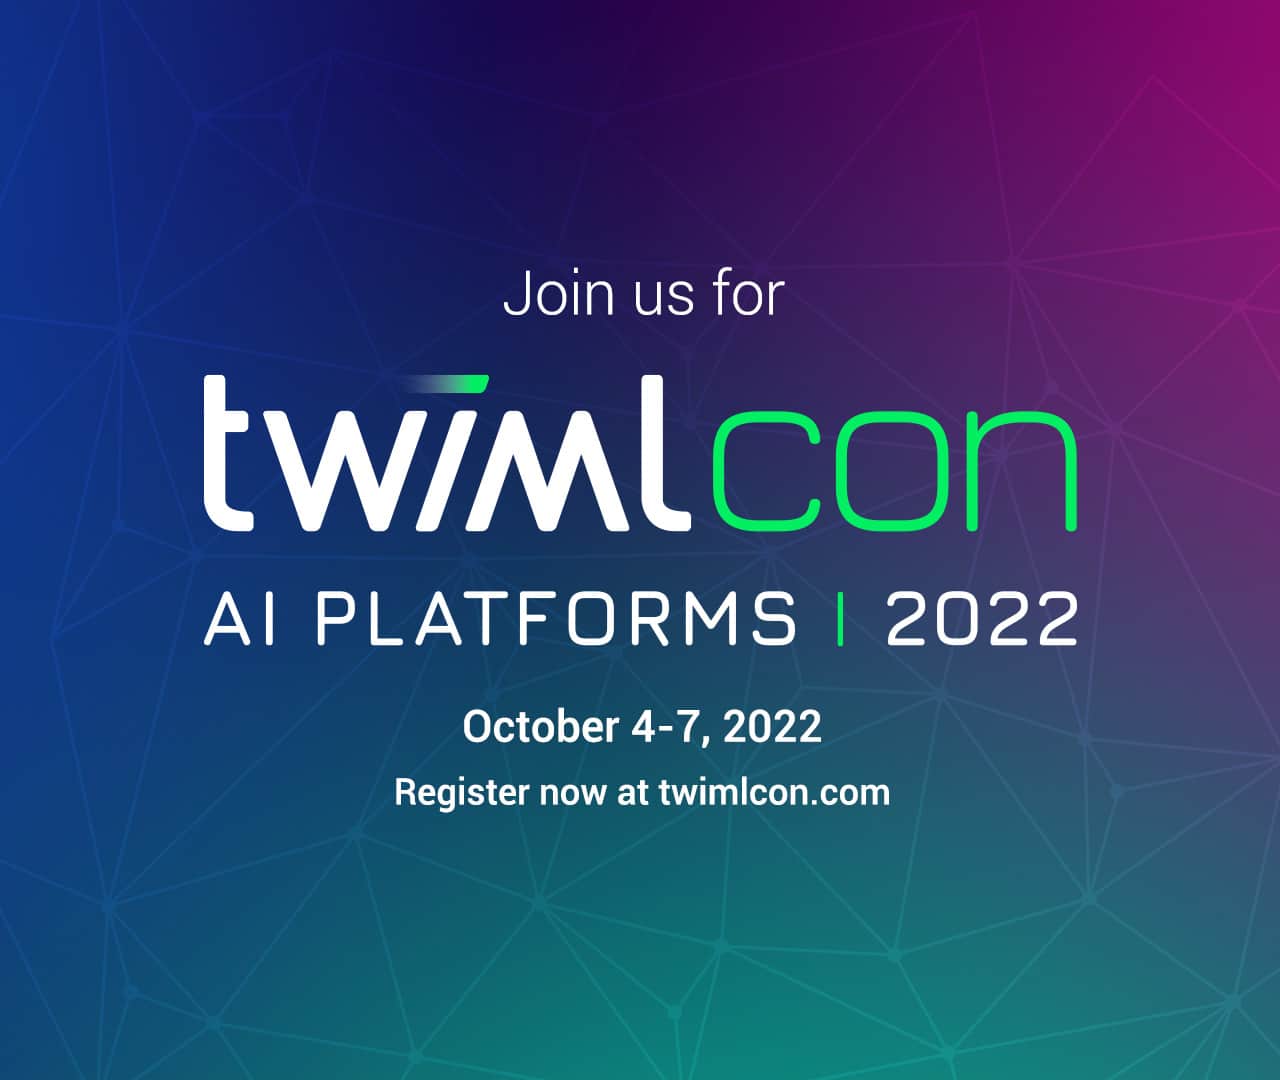 Top 10 Reasons to Attend TWIMLcon